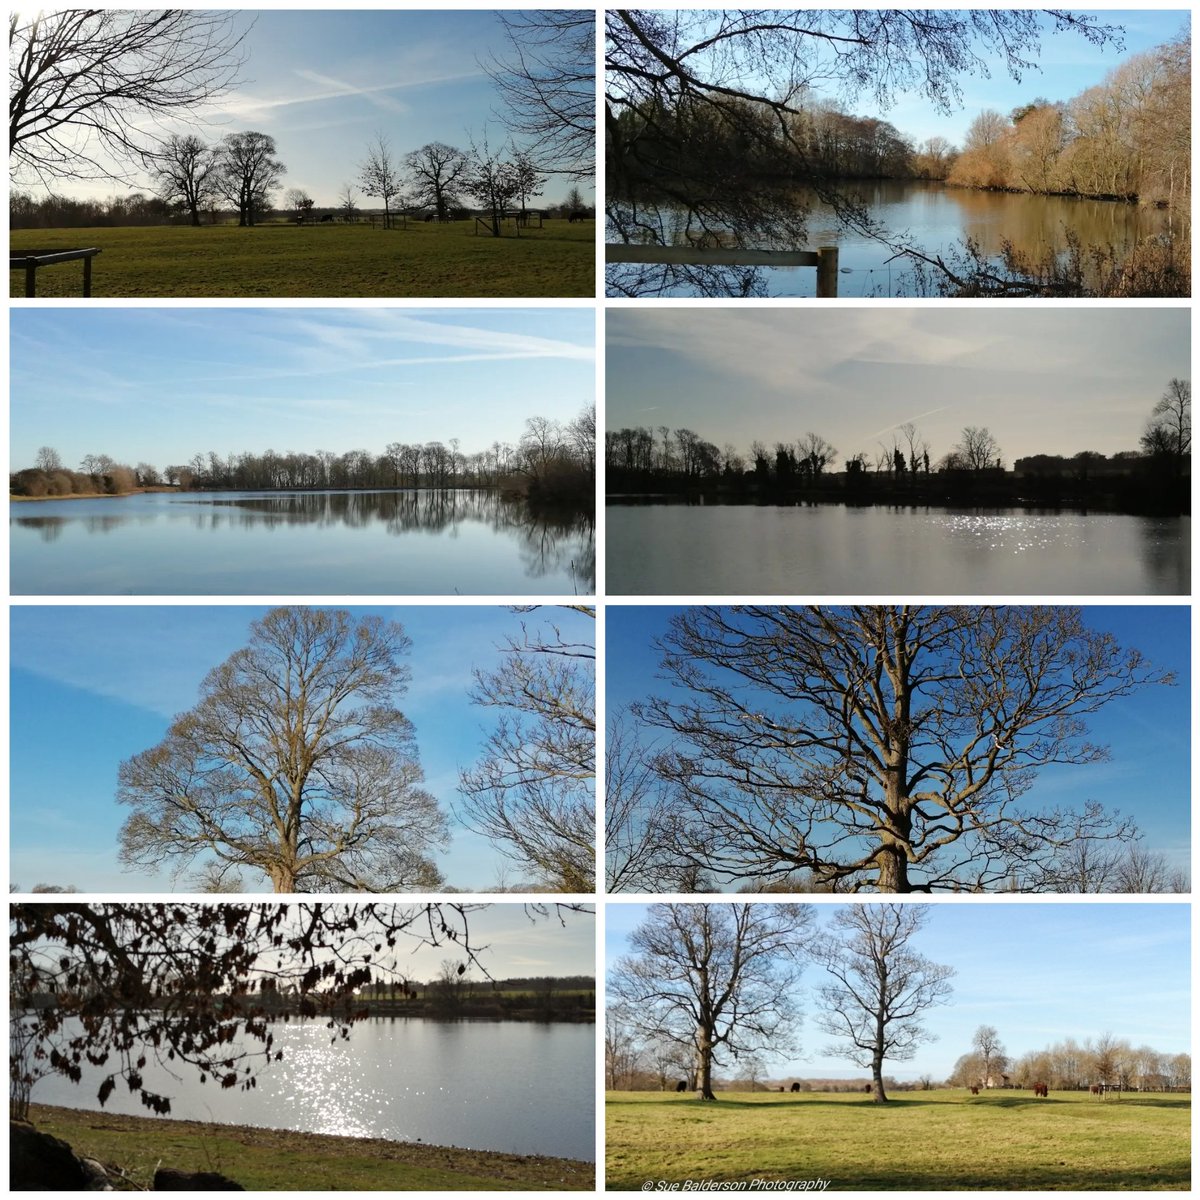 Photo's from our walk a few days ago.#TreeClub #Lakewalks #coutrywalks #NaturePhotography #nature